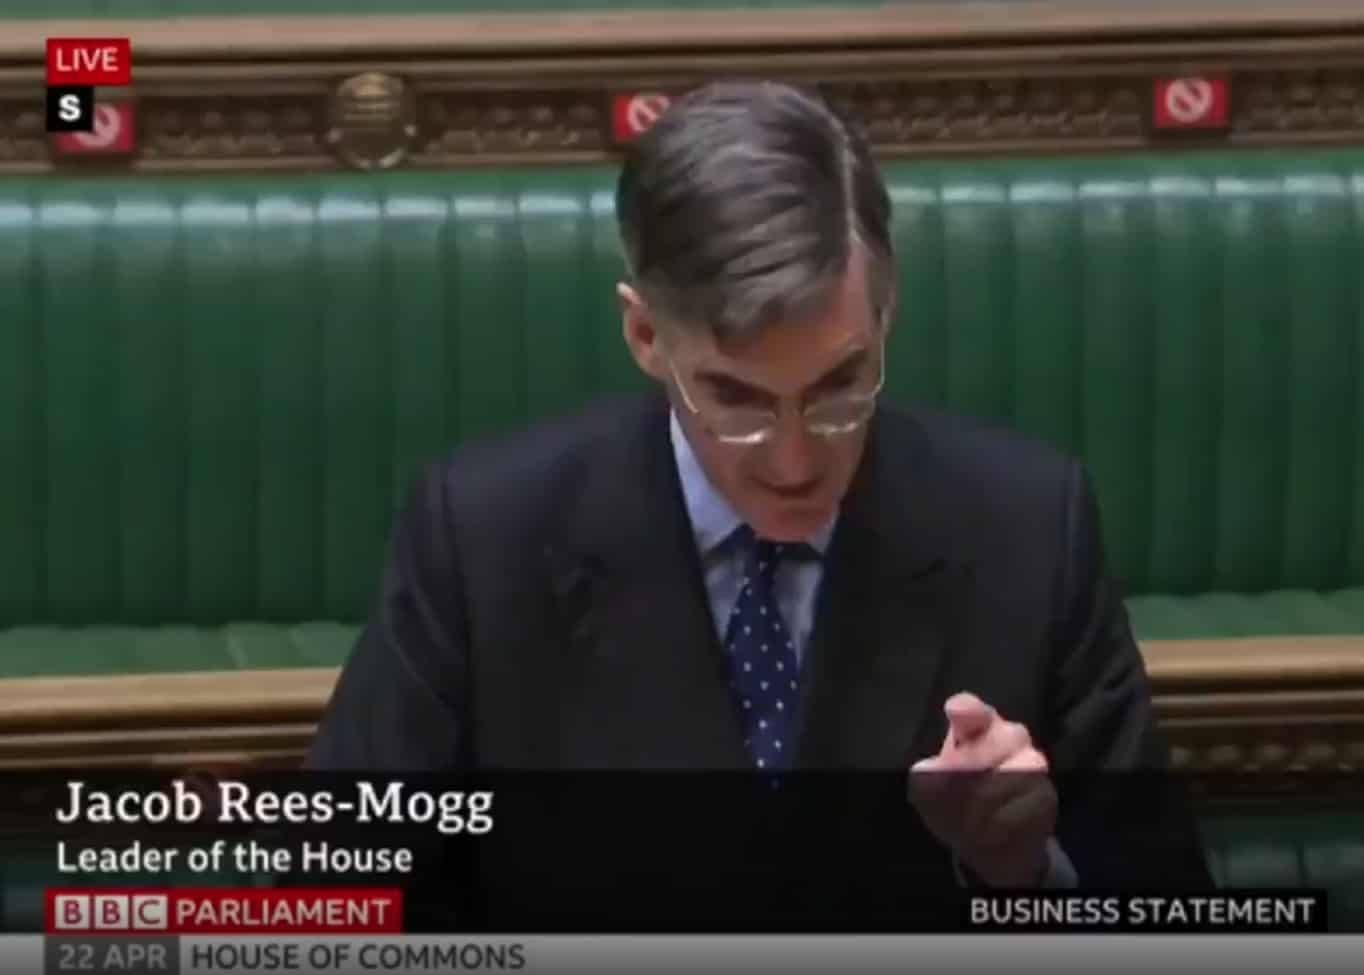 Rees-Mogg says ‘we should praise James Dyson’ as inquiry is launched into tax texts